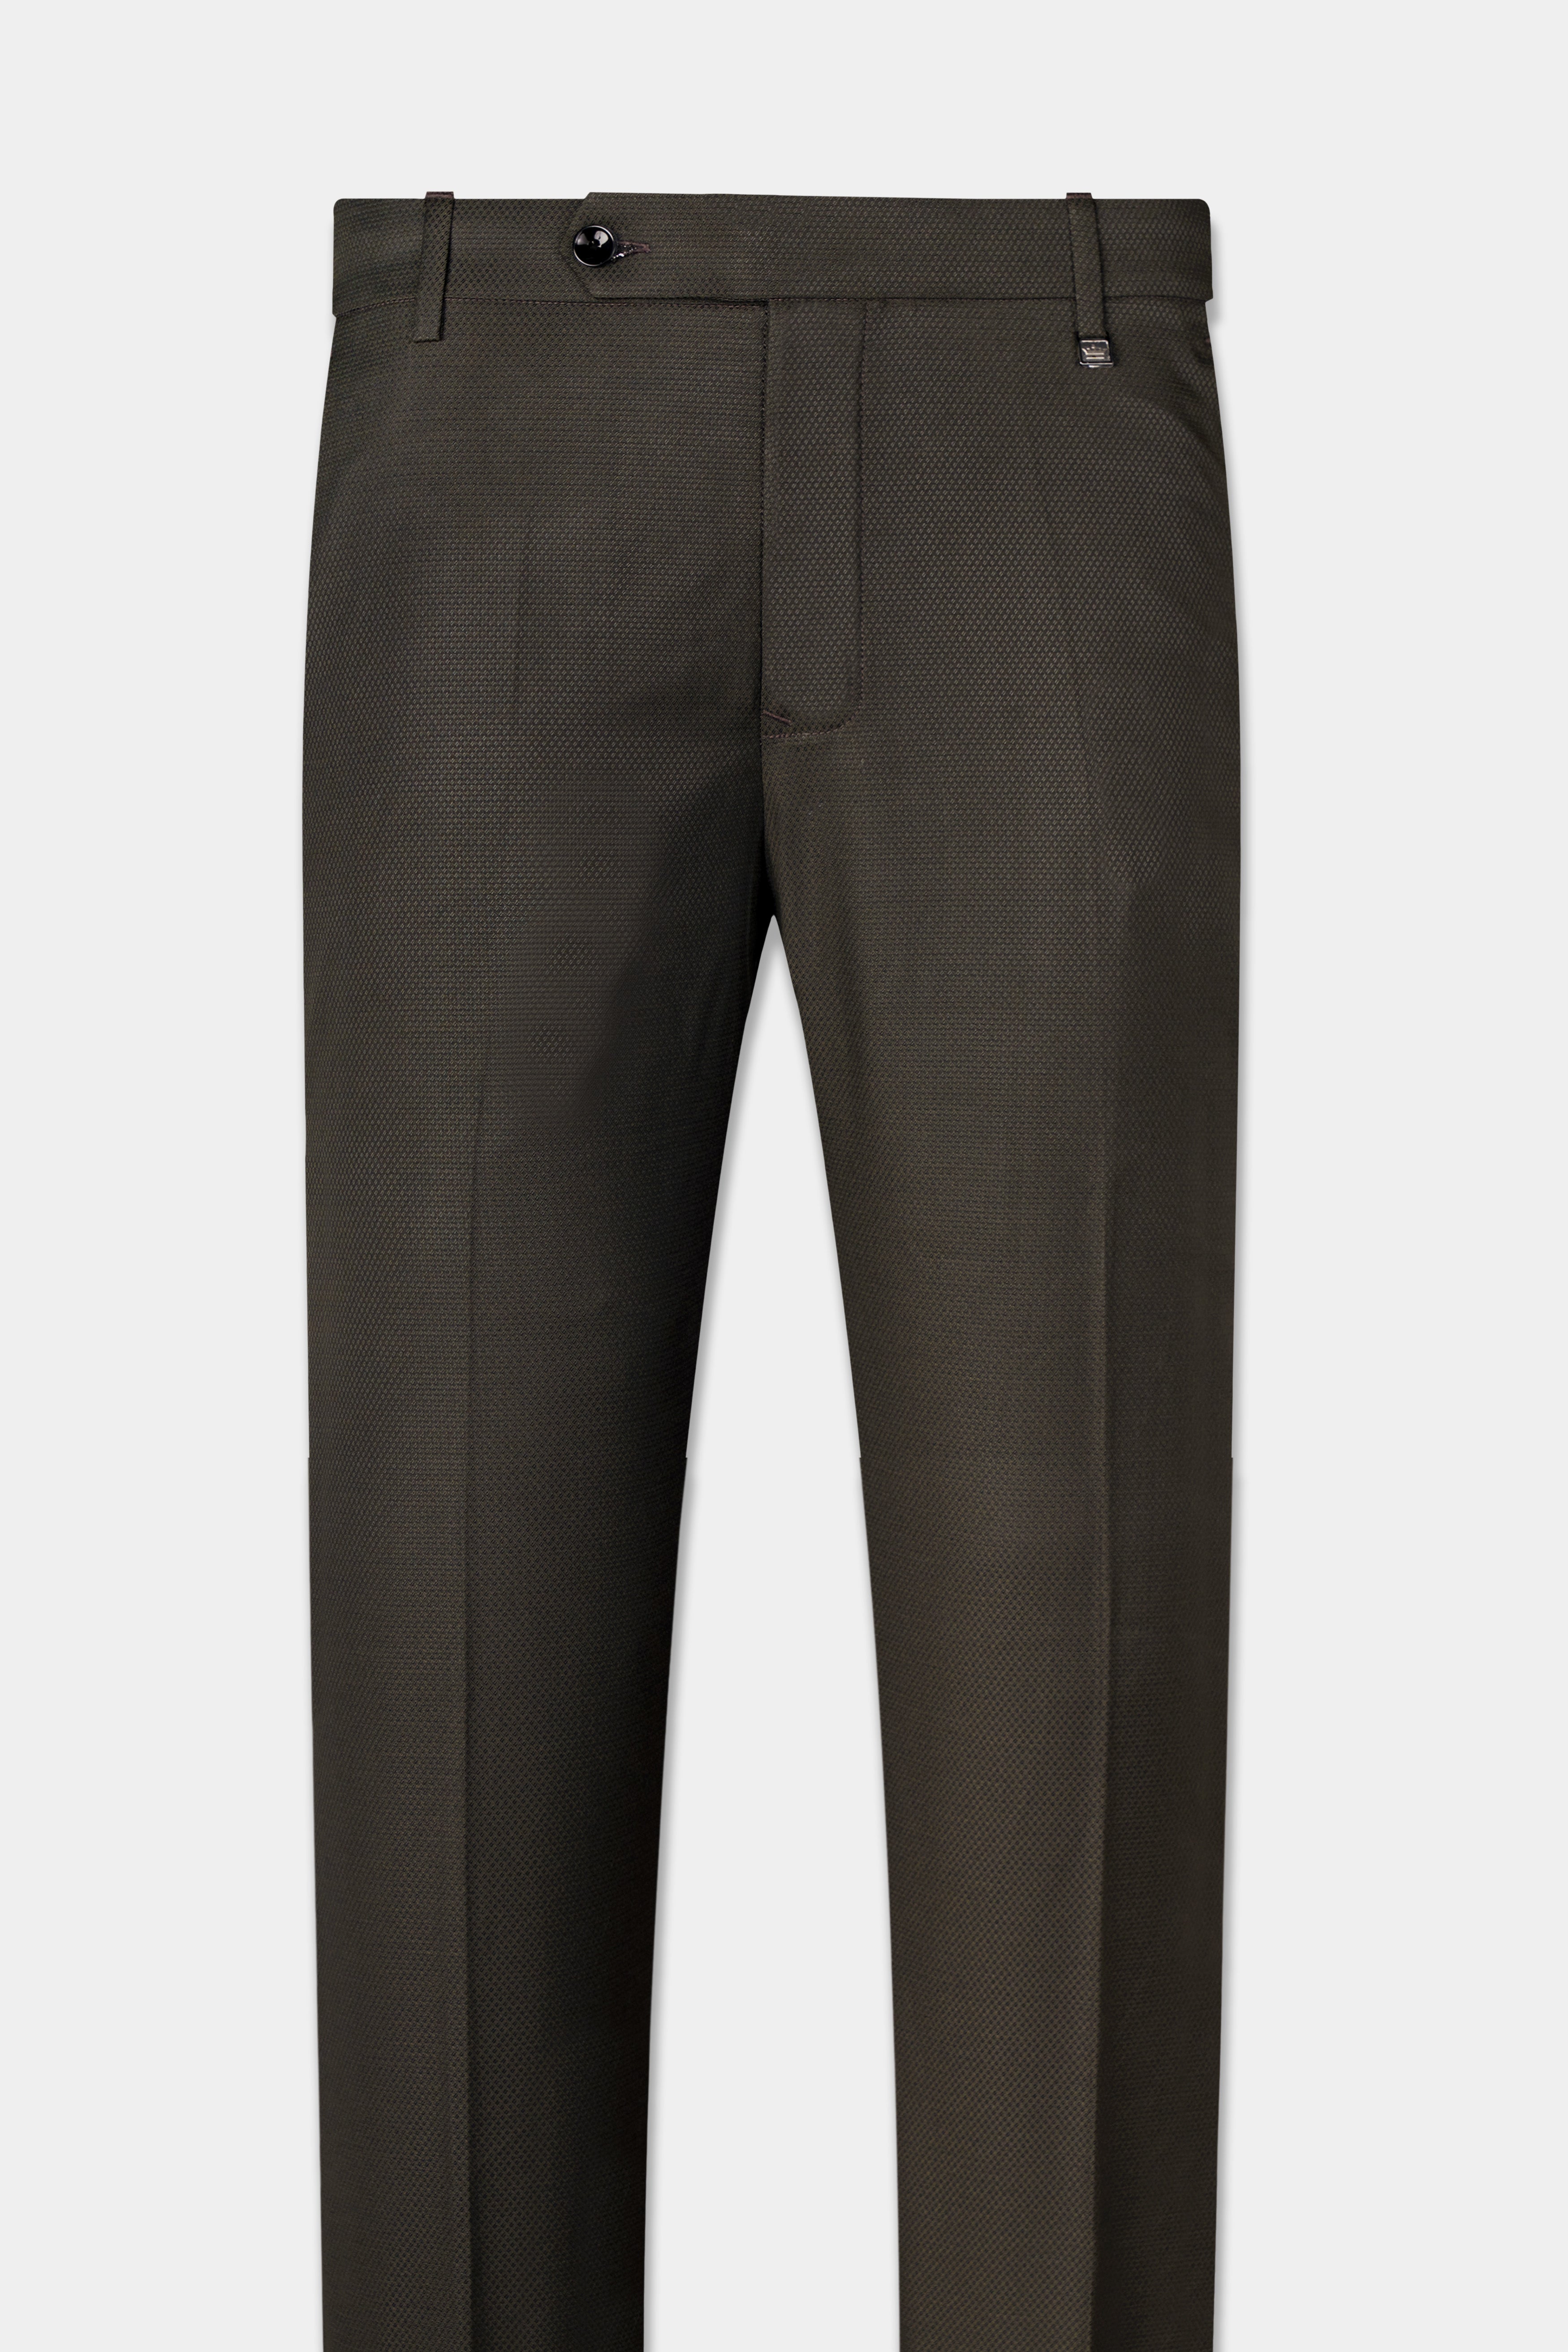 Merline Dark Brown Dobby Textured Double Breasted Suit